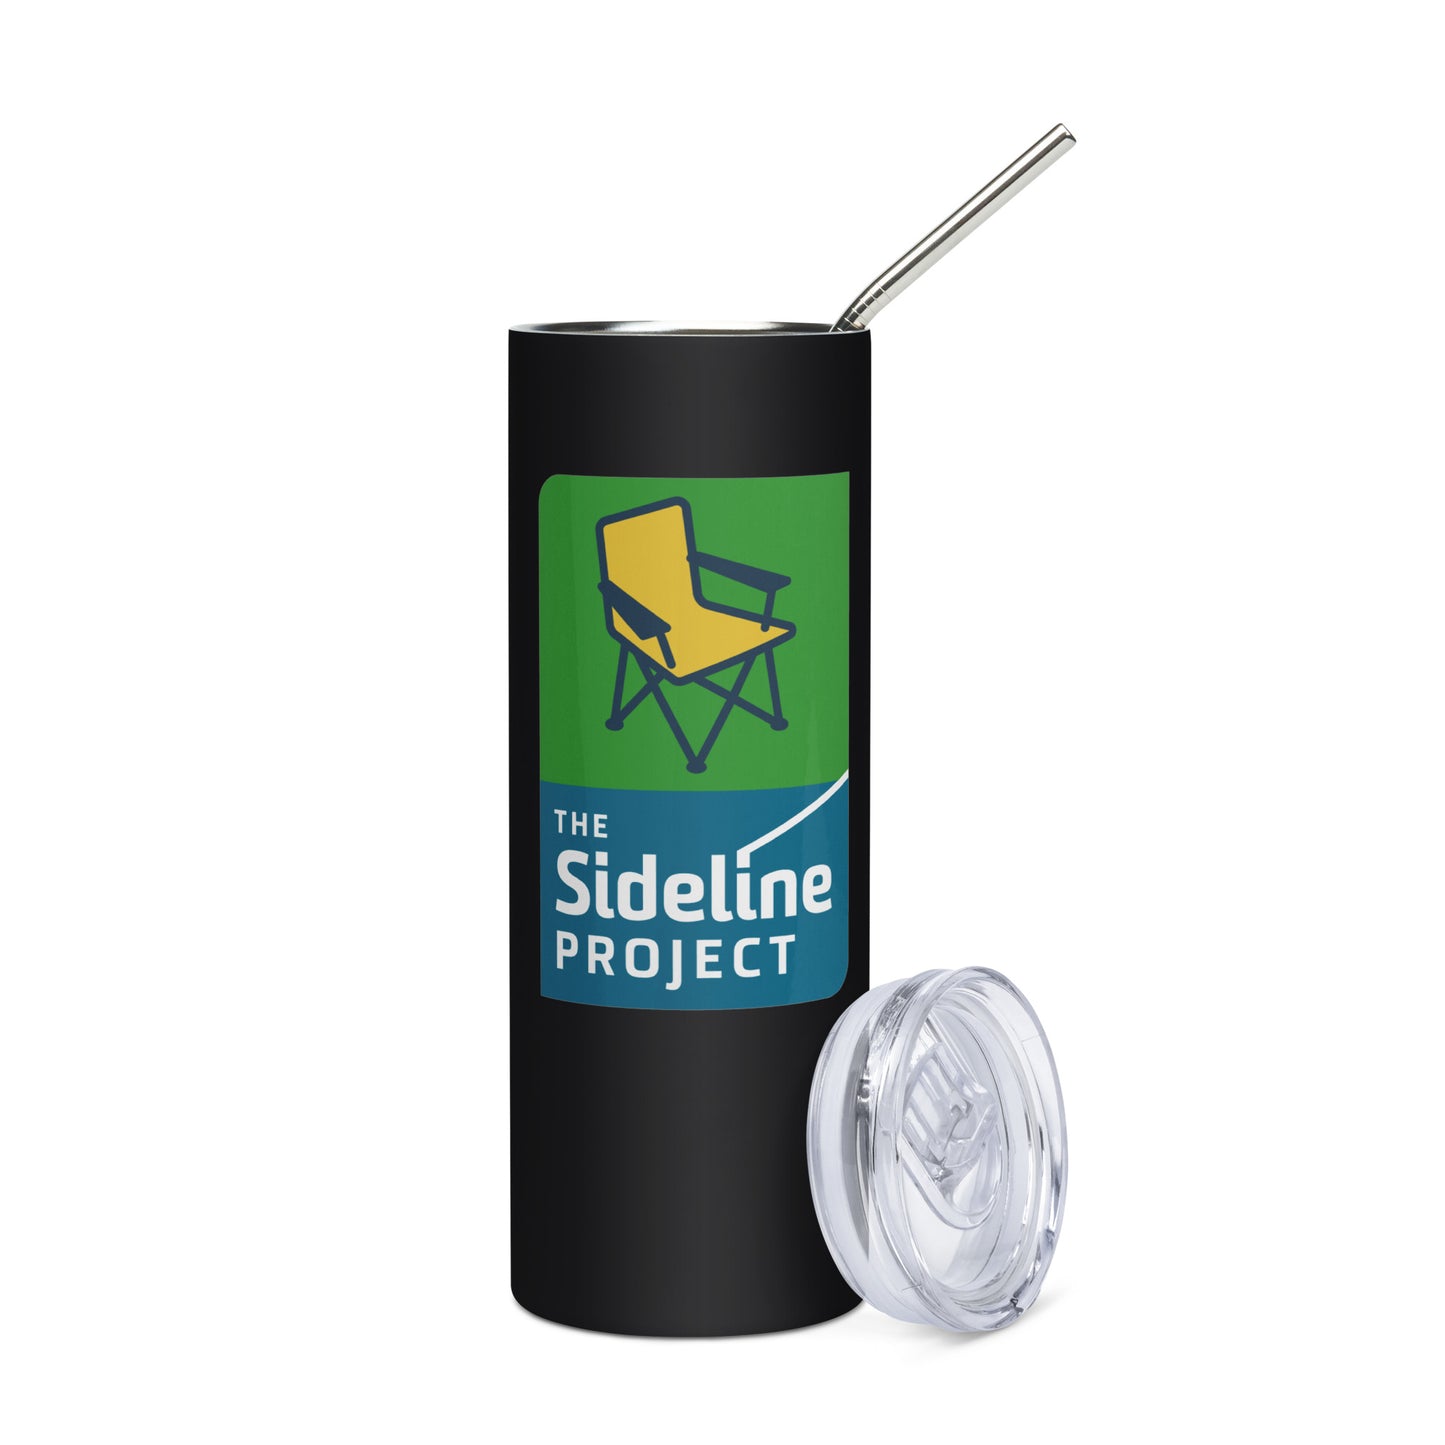 The Sideline Project Stainless Steel Tumbler